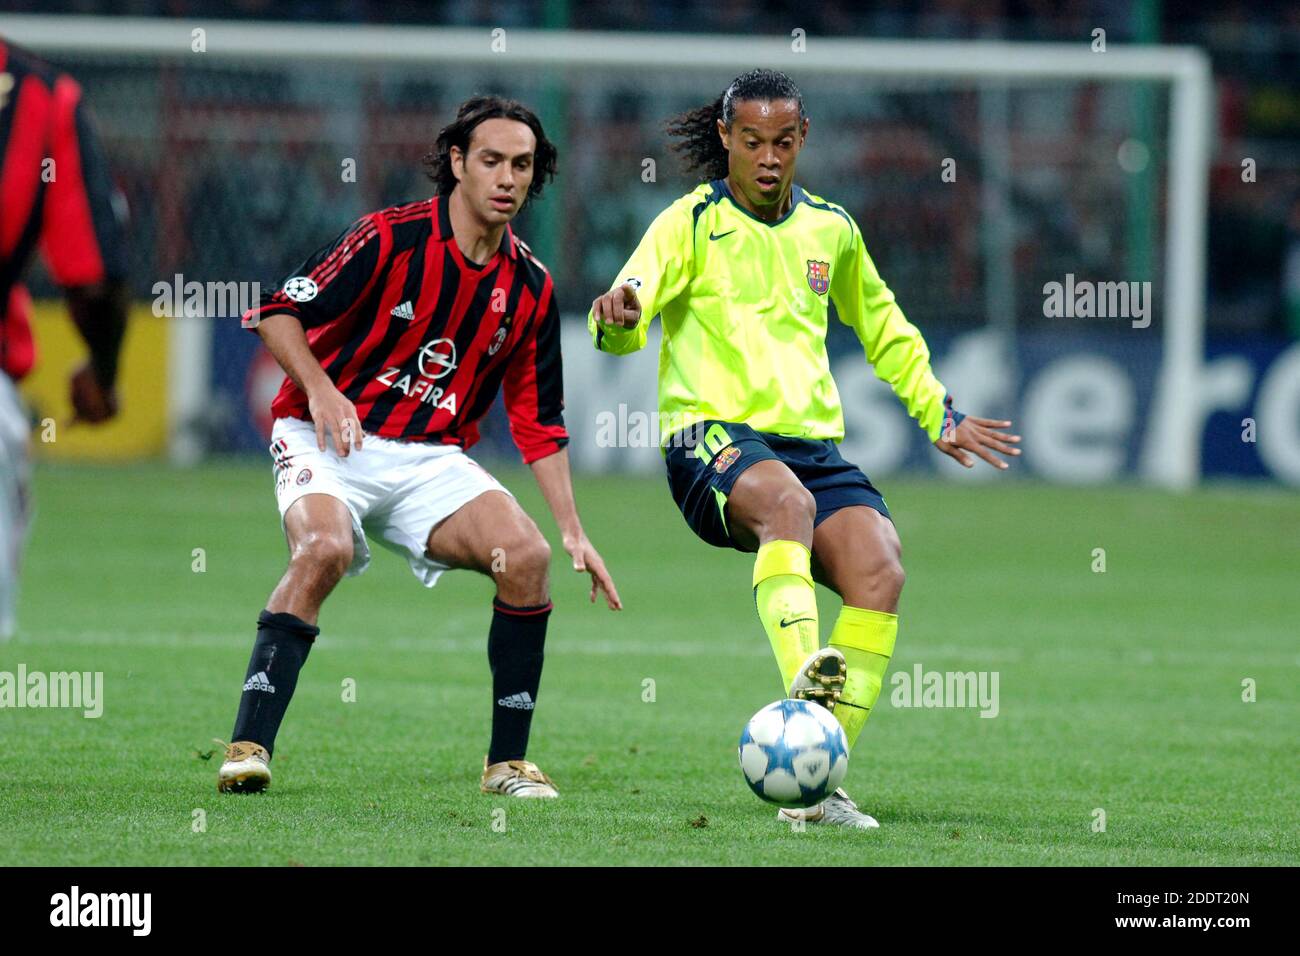 Brazilian football player Ronaldinho of FC Barcelona, and Alessandro Nesta of AC Milan during a UEFA Champions League's match, in Milan, 2007. Stock Photo